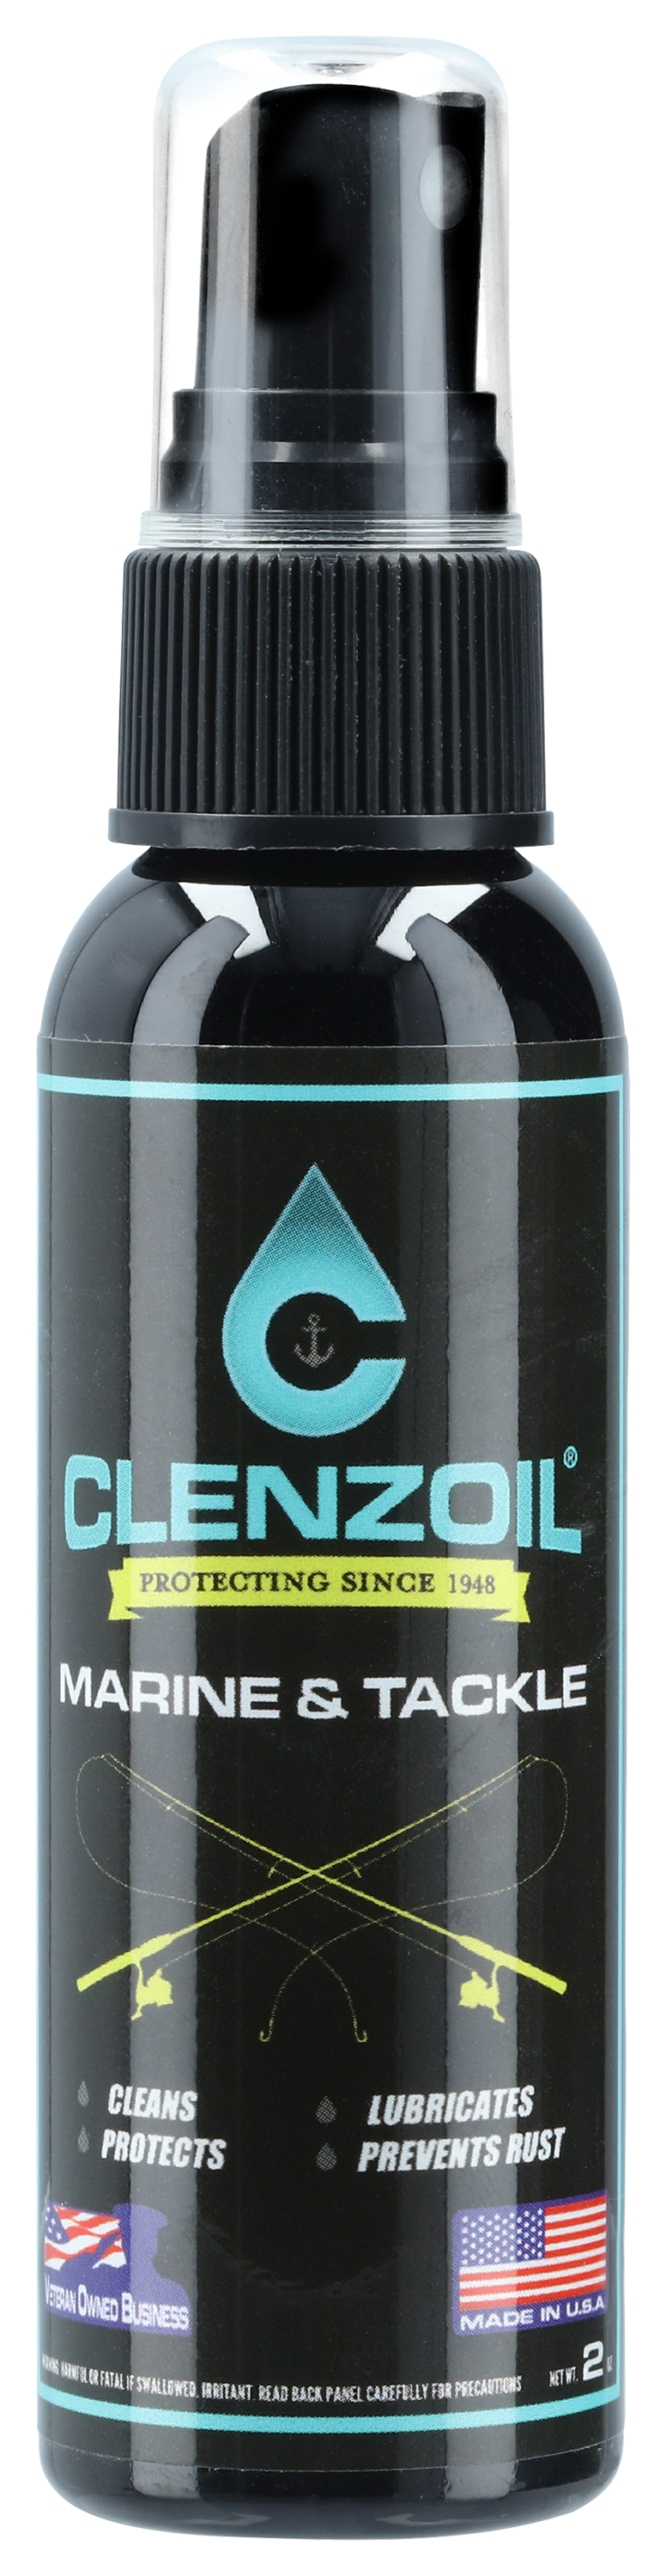 Clenzoil Marine & Tackle 0.5 oz. Fishing Reel Oil Needle Oilers | 3 Pack |  One-Step Cleaner, Lubricant, Protectant [CLP] Cleaning + Lubricating Oil in